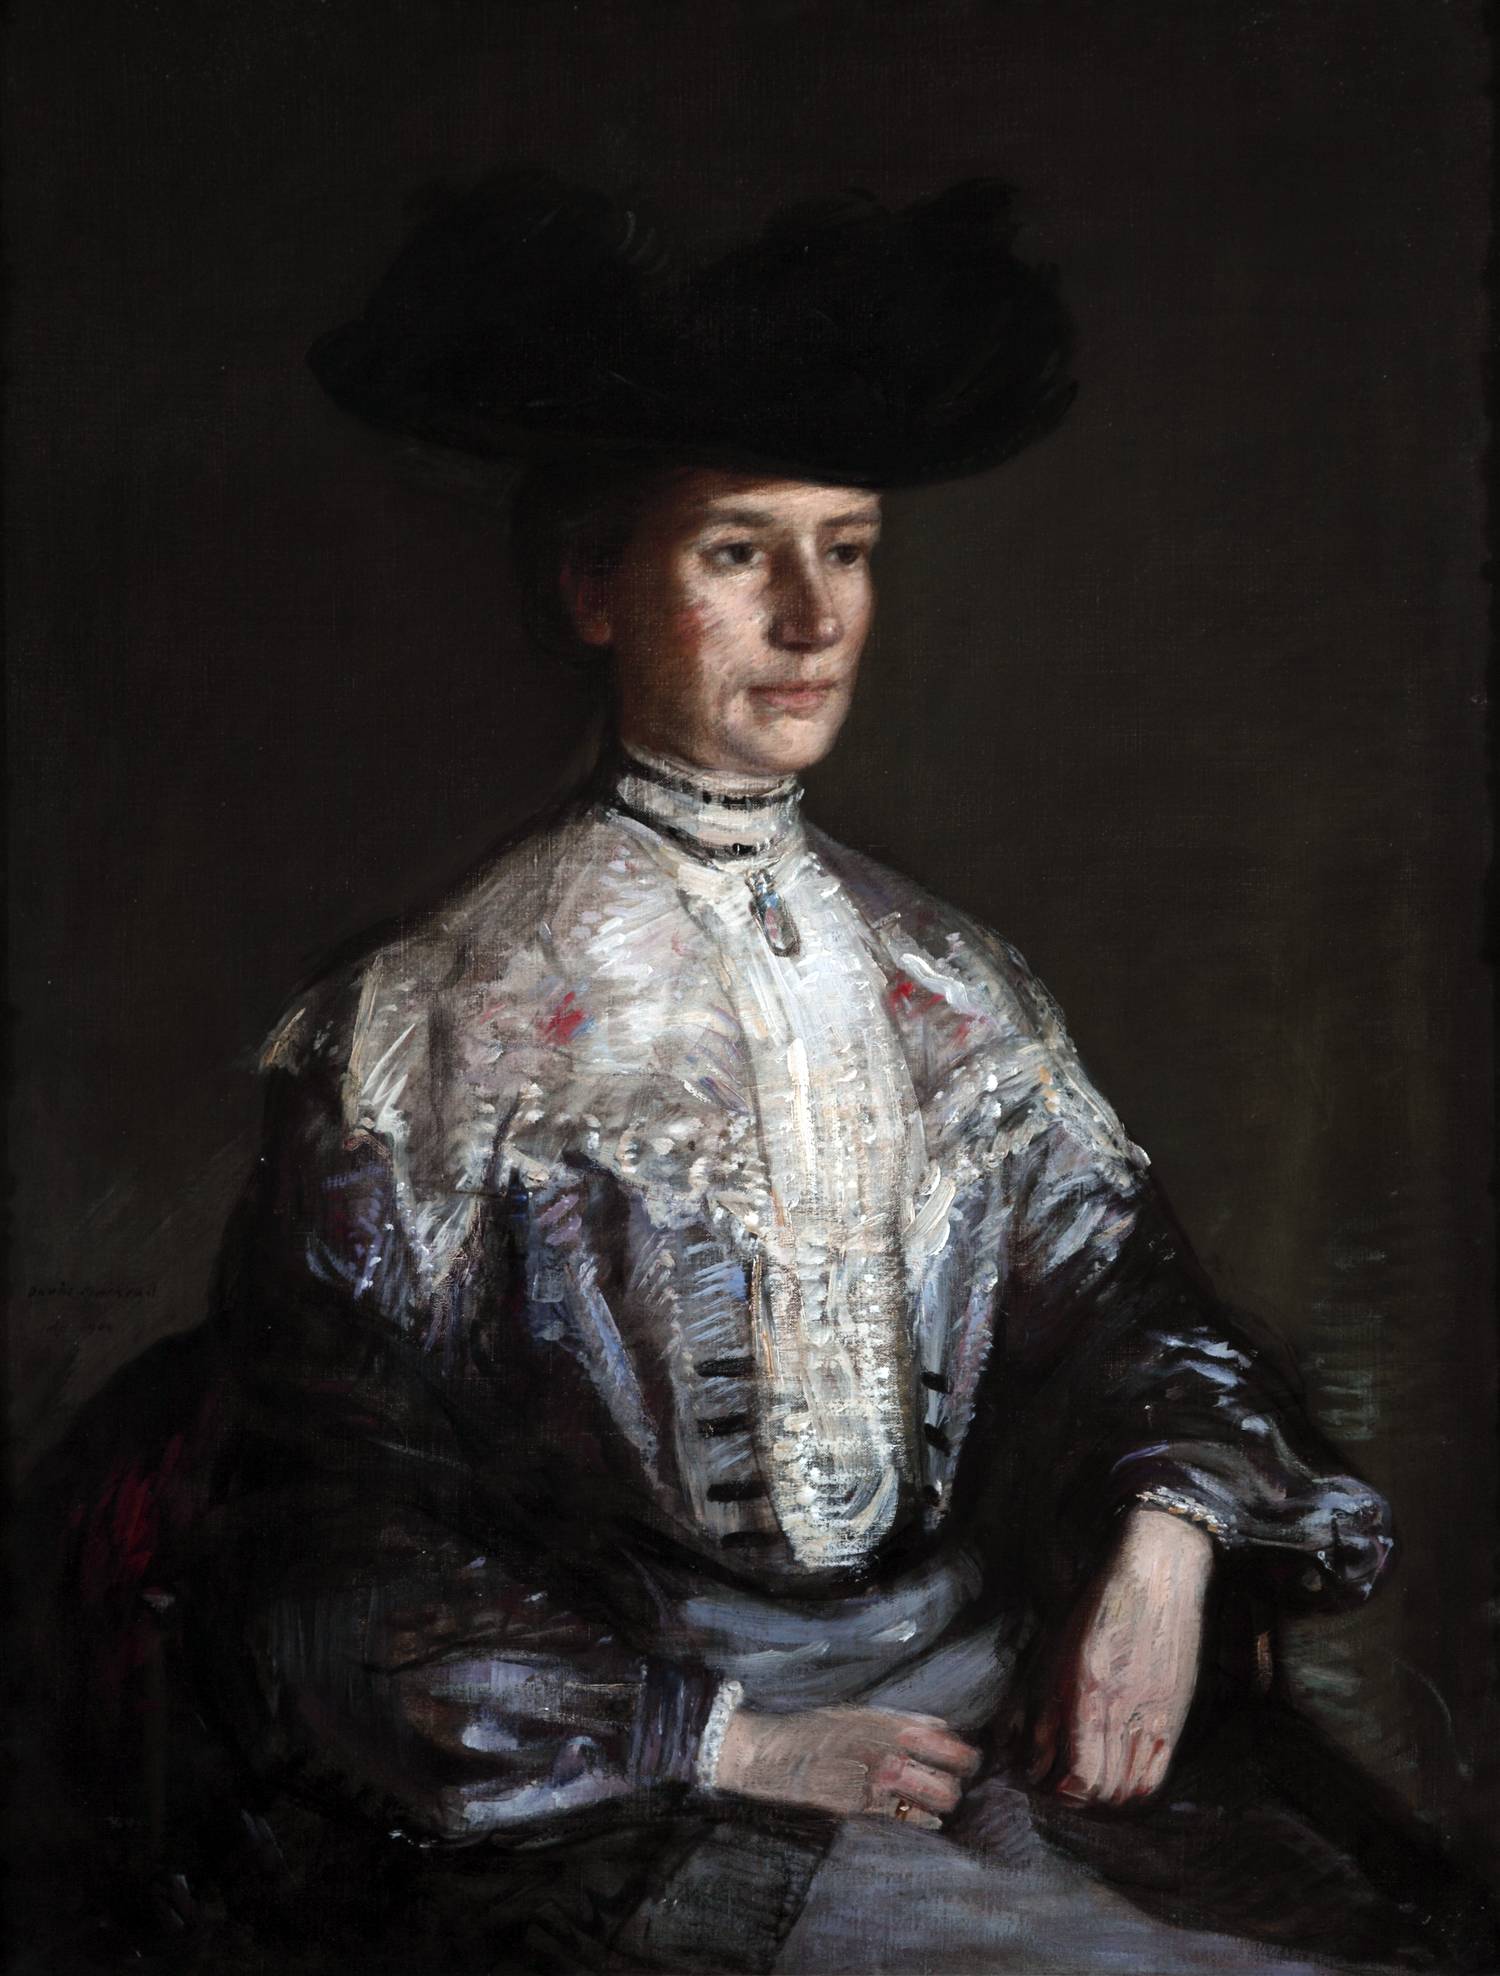 Emma Holt by David Muirhead, Victoria Museum and Gallery